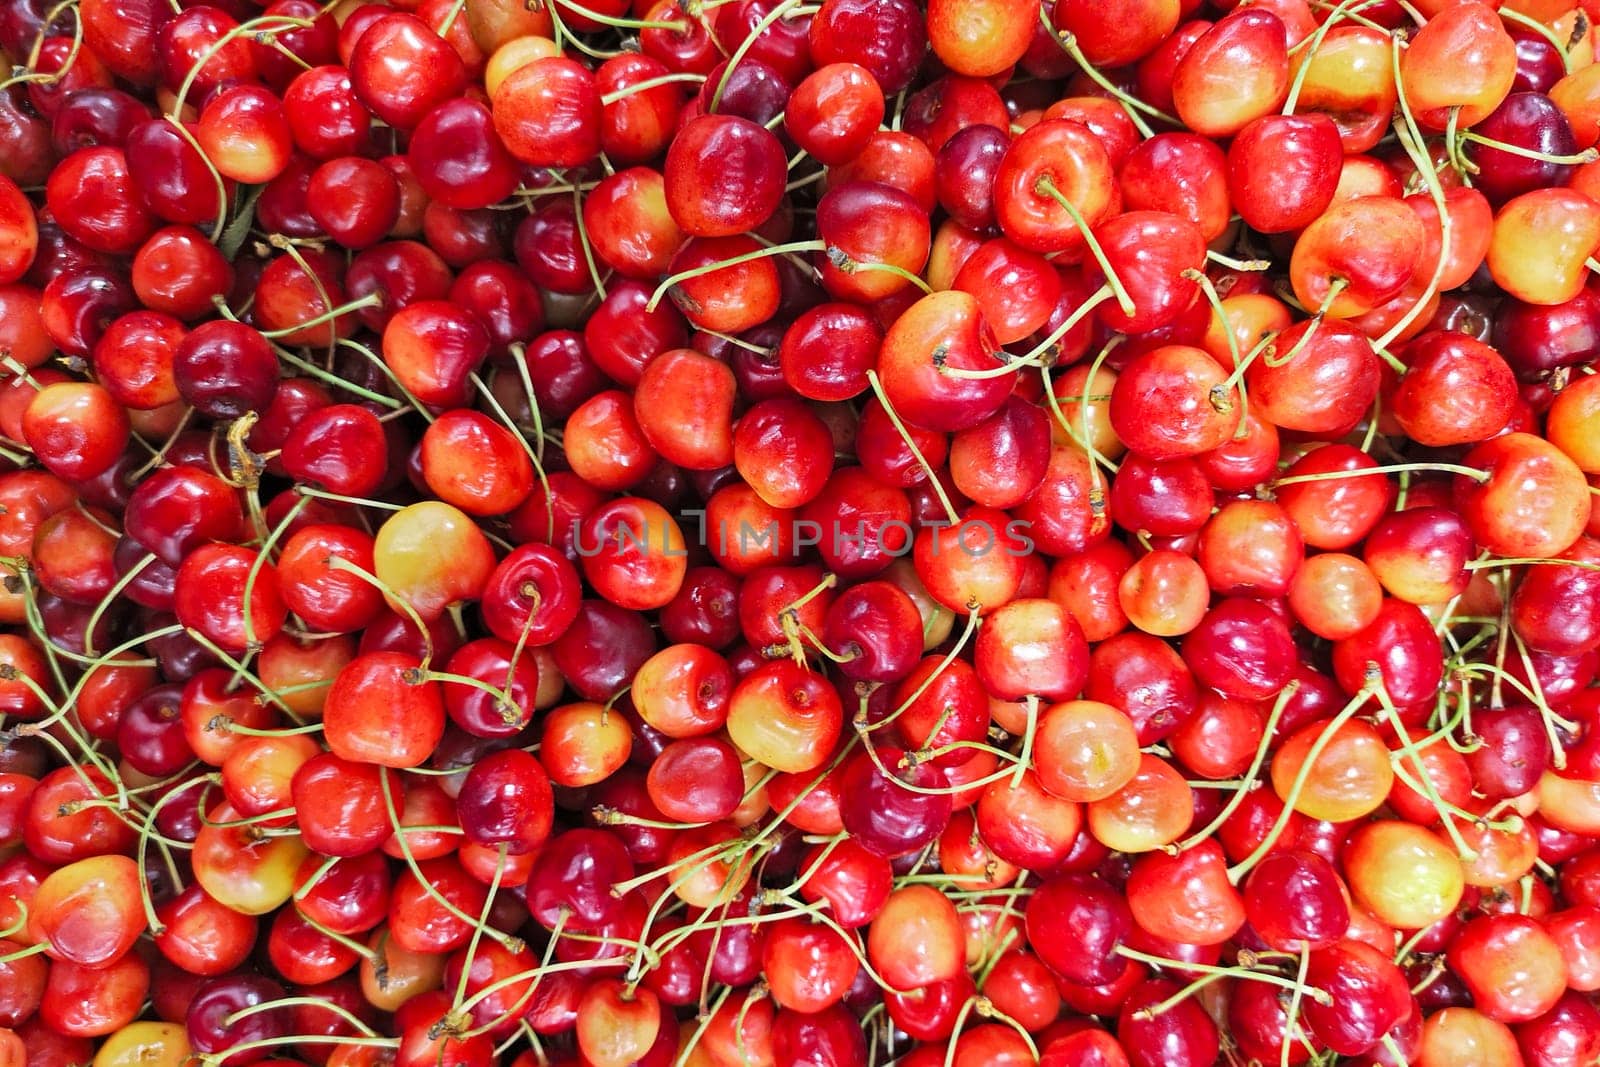 Pile of ripe cherries with stalks. Large collection of fresh red cherries by andreyz